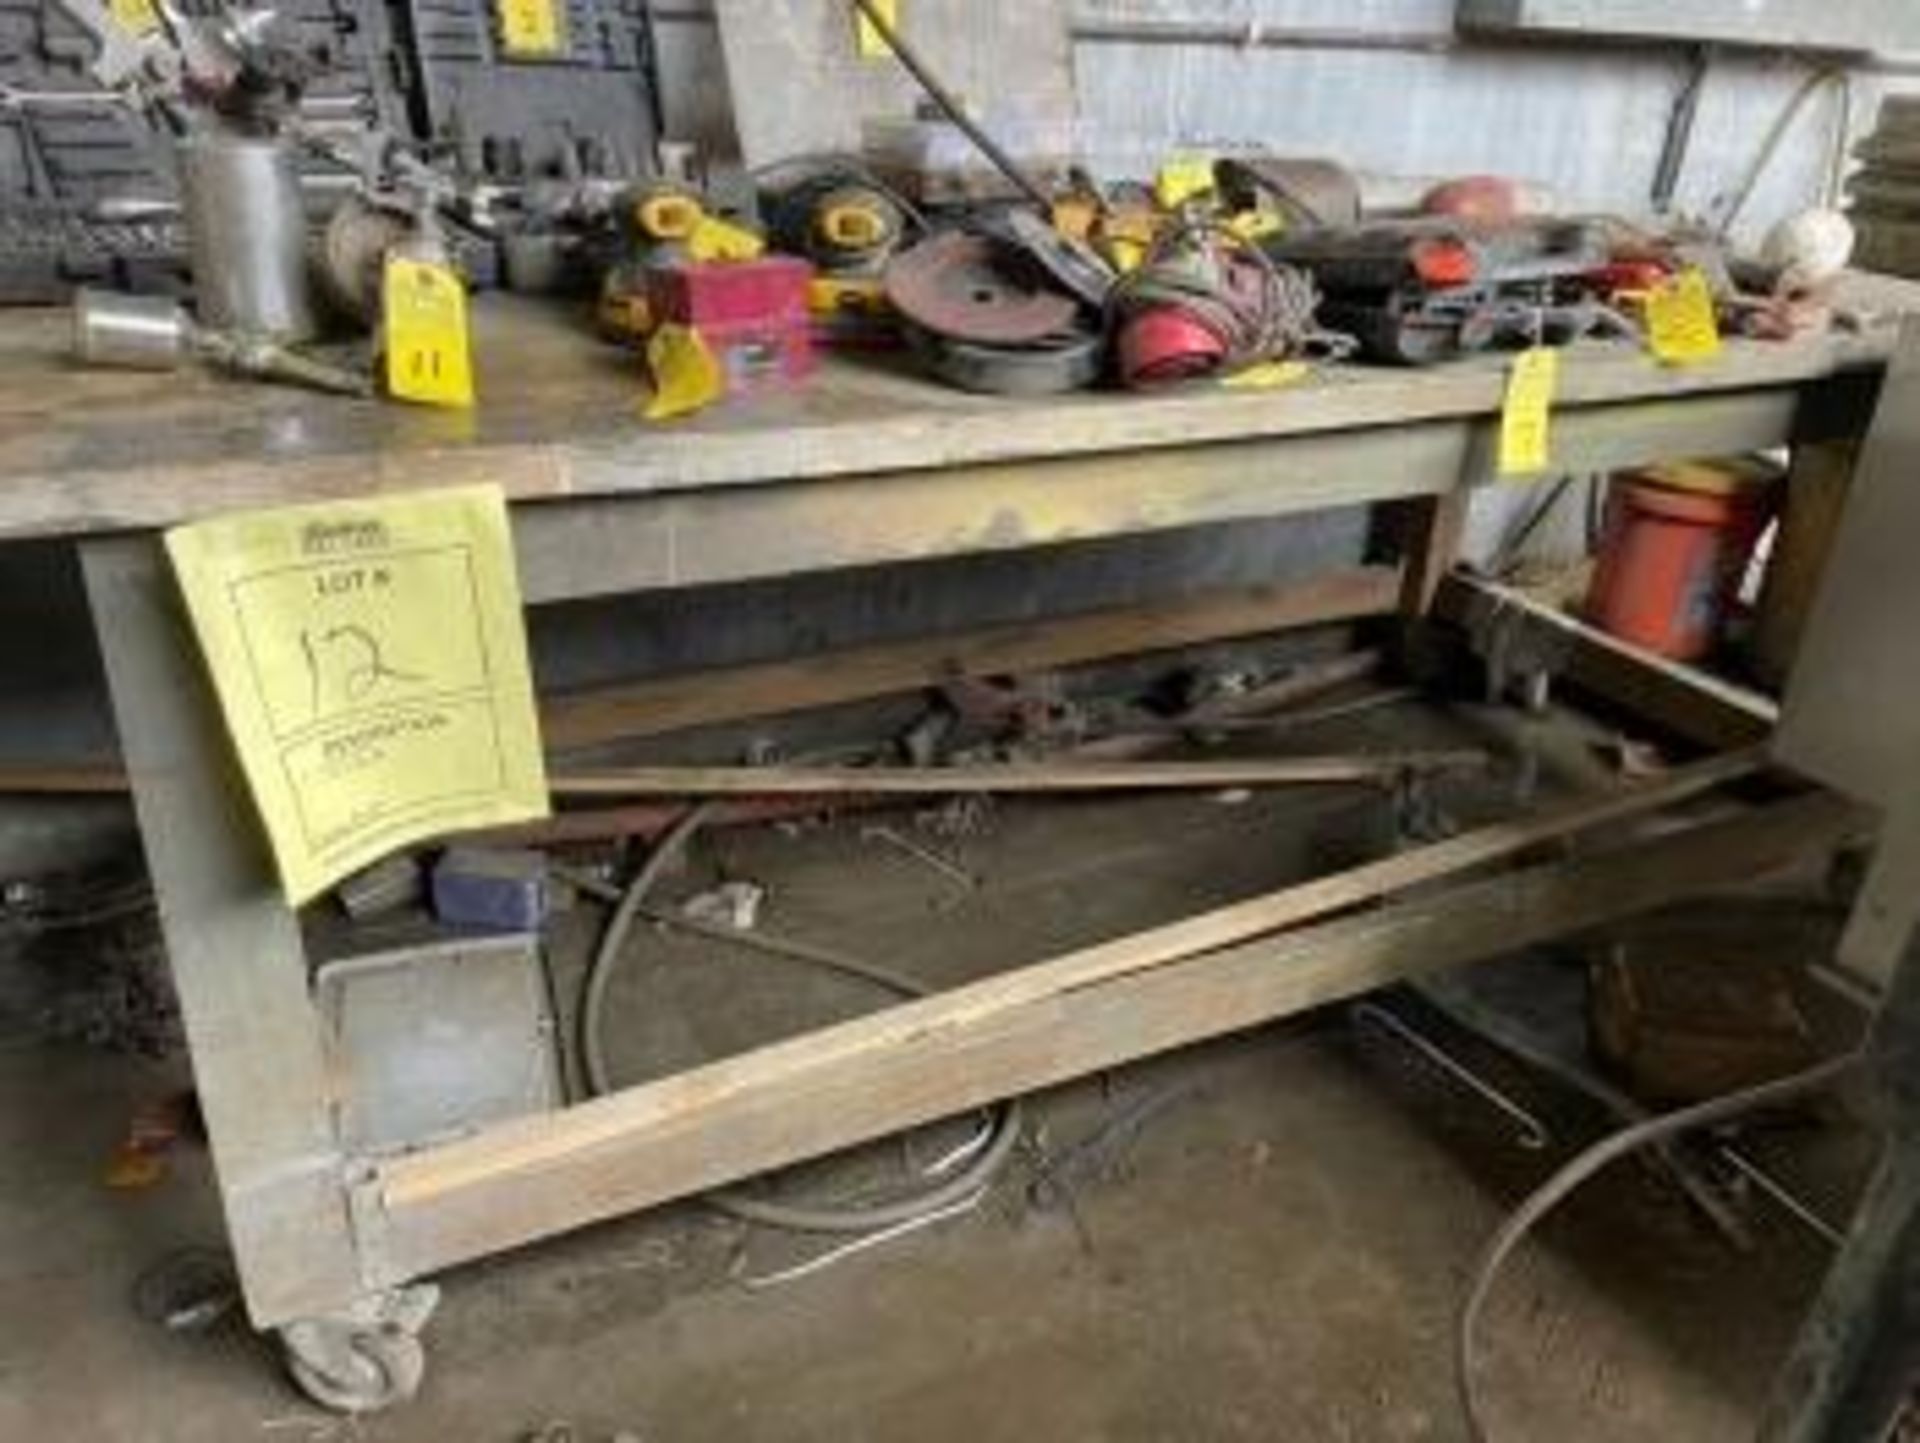 WOOD WORK BENCH - 8'x4' (NO CONTENTS) (LOCATED IN HIALEAH, FL)